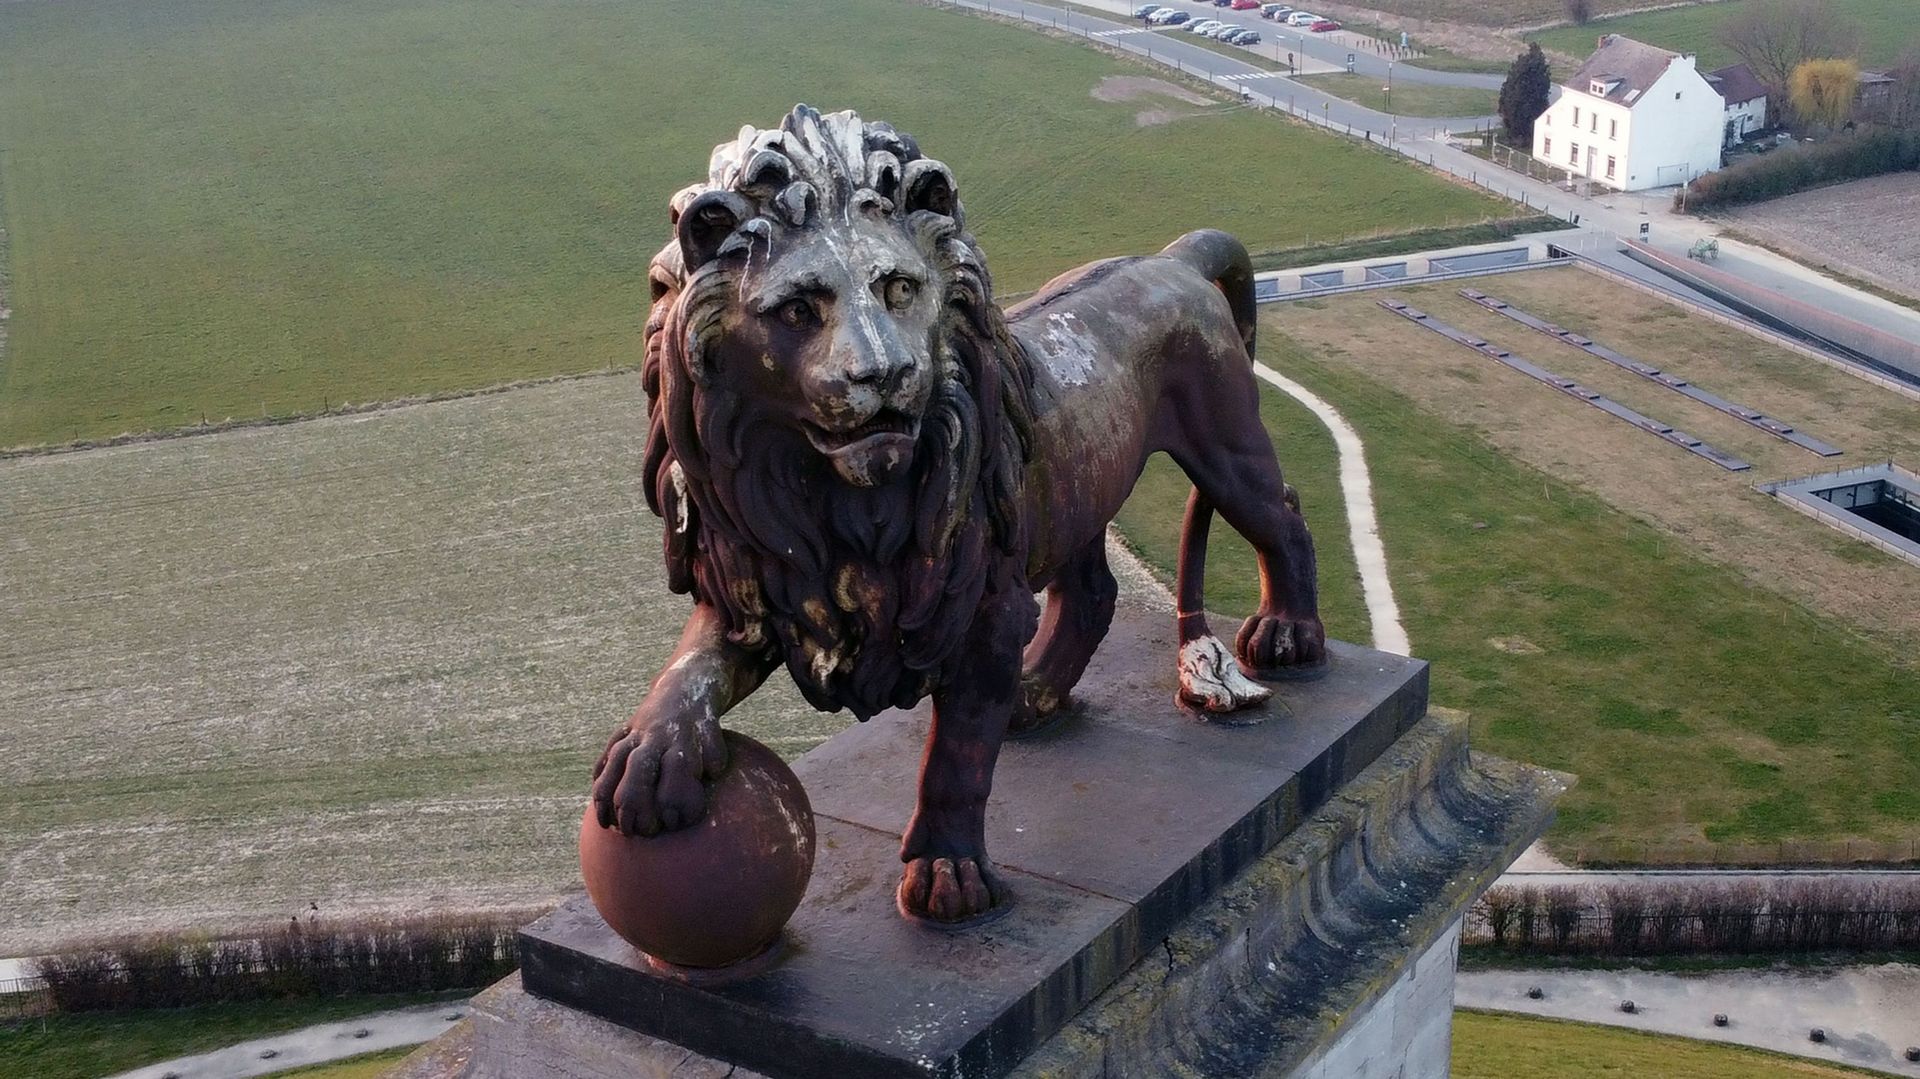 The lion statue, symbol of the Battle of Waterloo in Belgium&#39 ; s Brussels